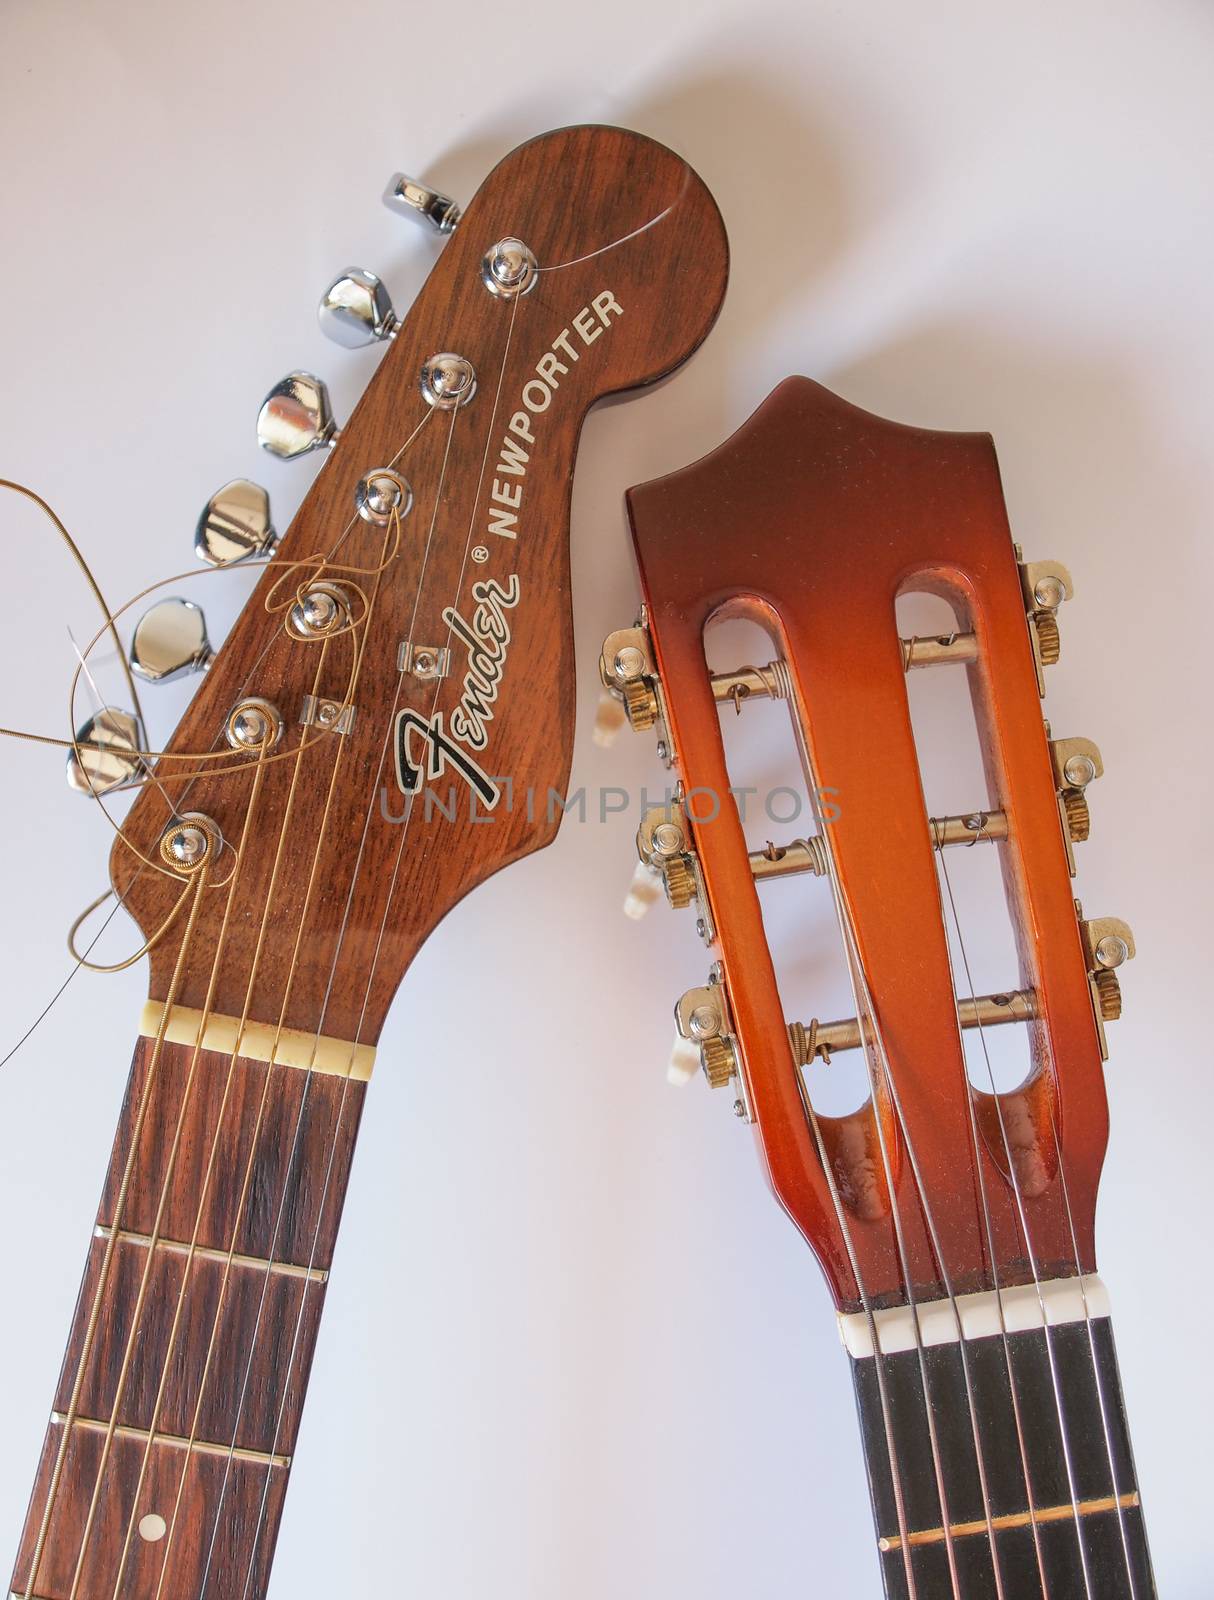 Fender guitar and generic folk guitar by paolo77